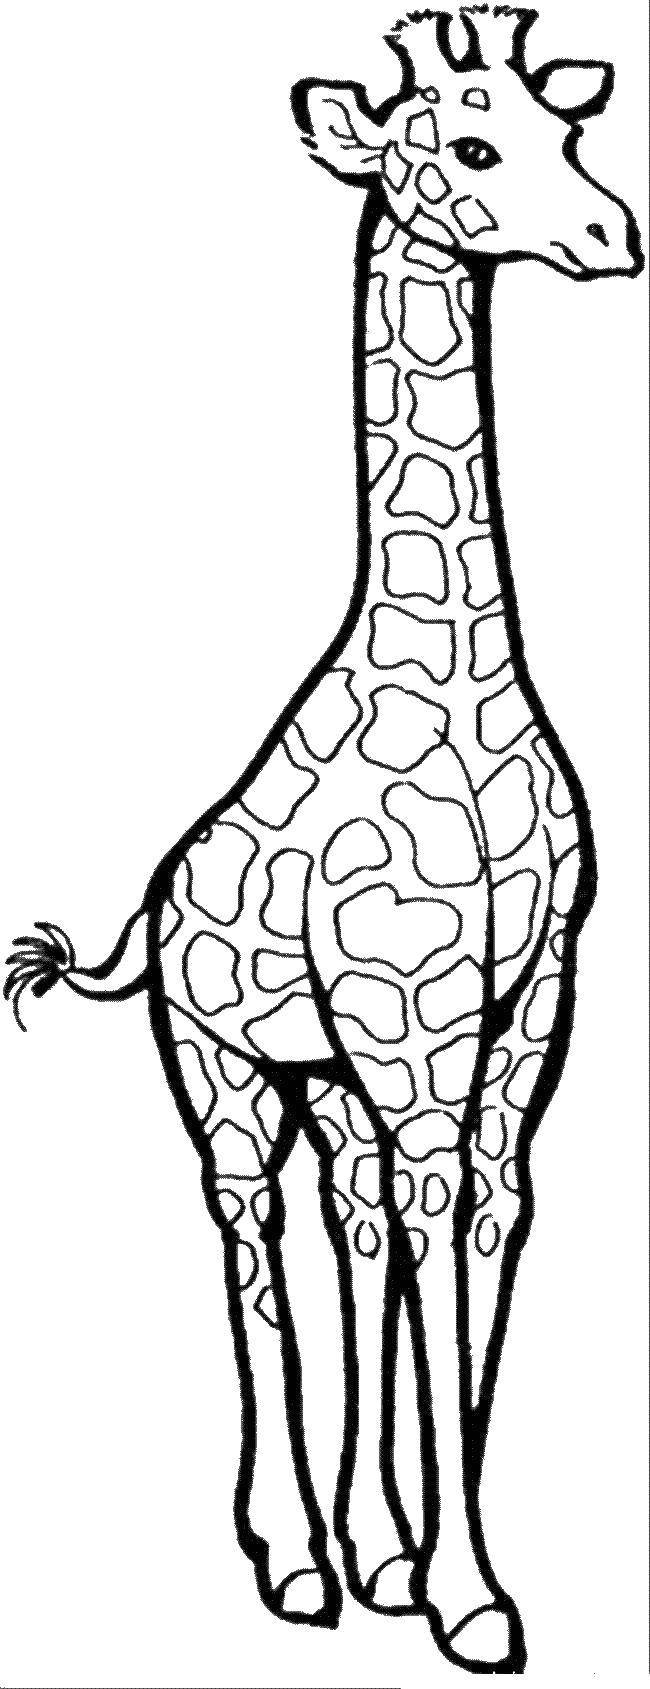 Coloring Very very high giraffe with long legs and a long neck. Category animals. Tags:  giraffe.